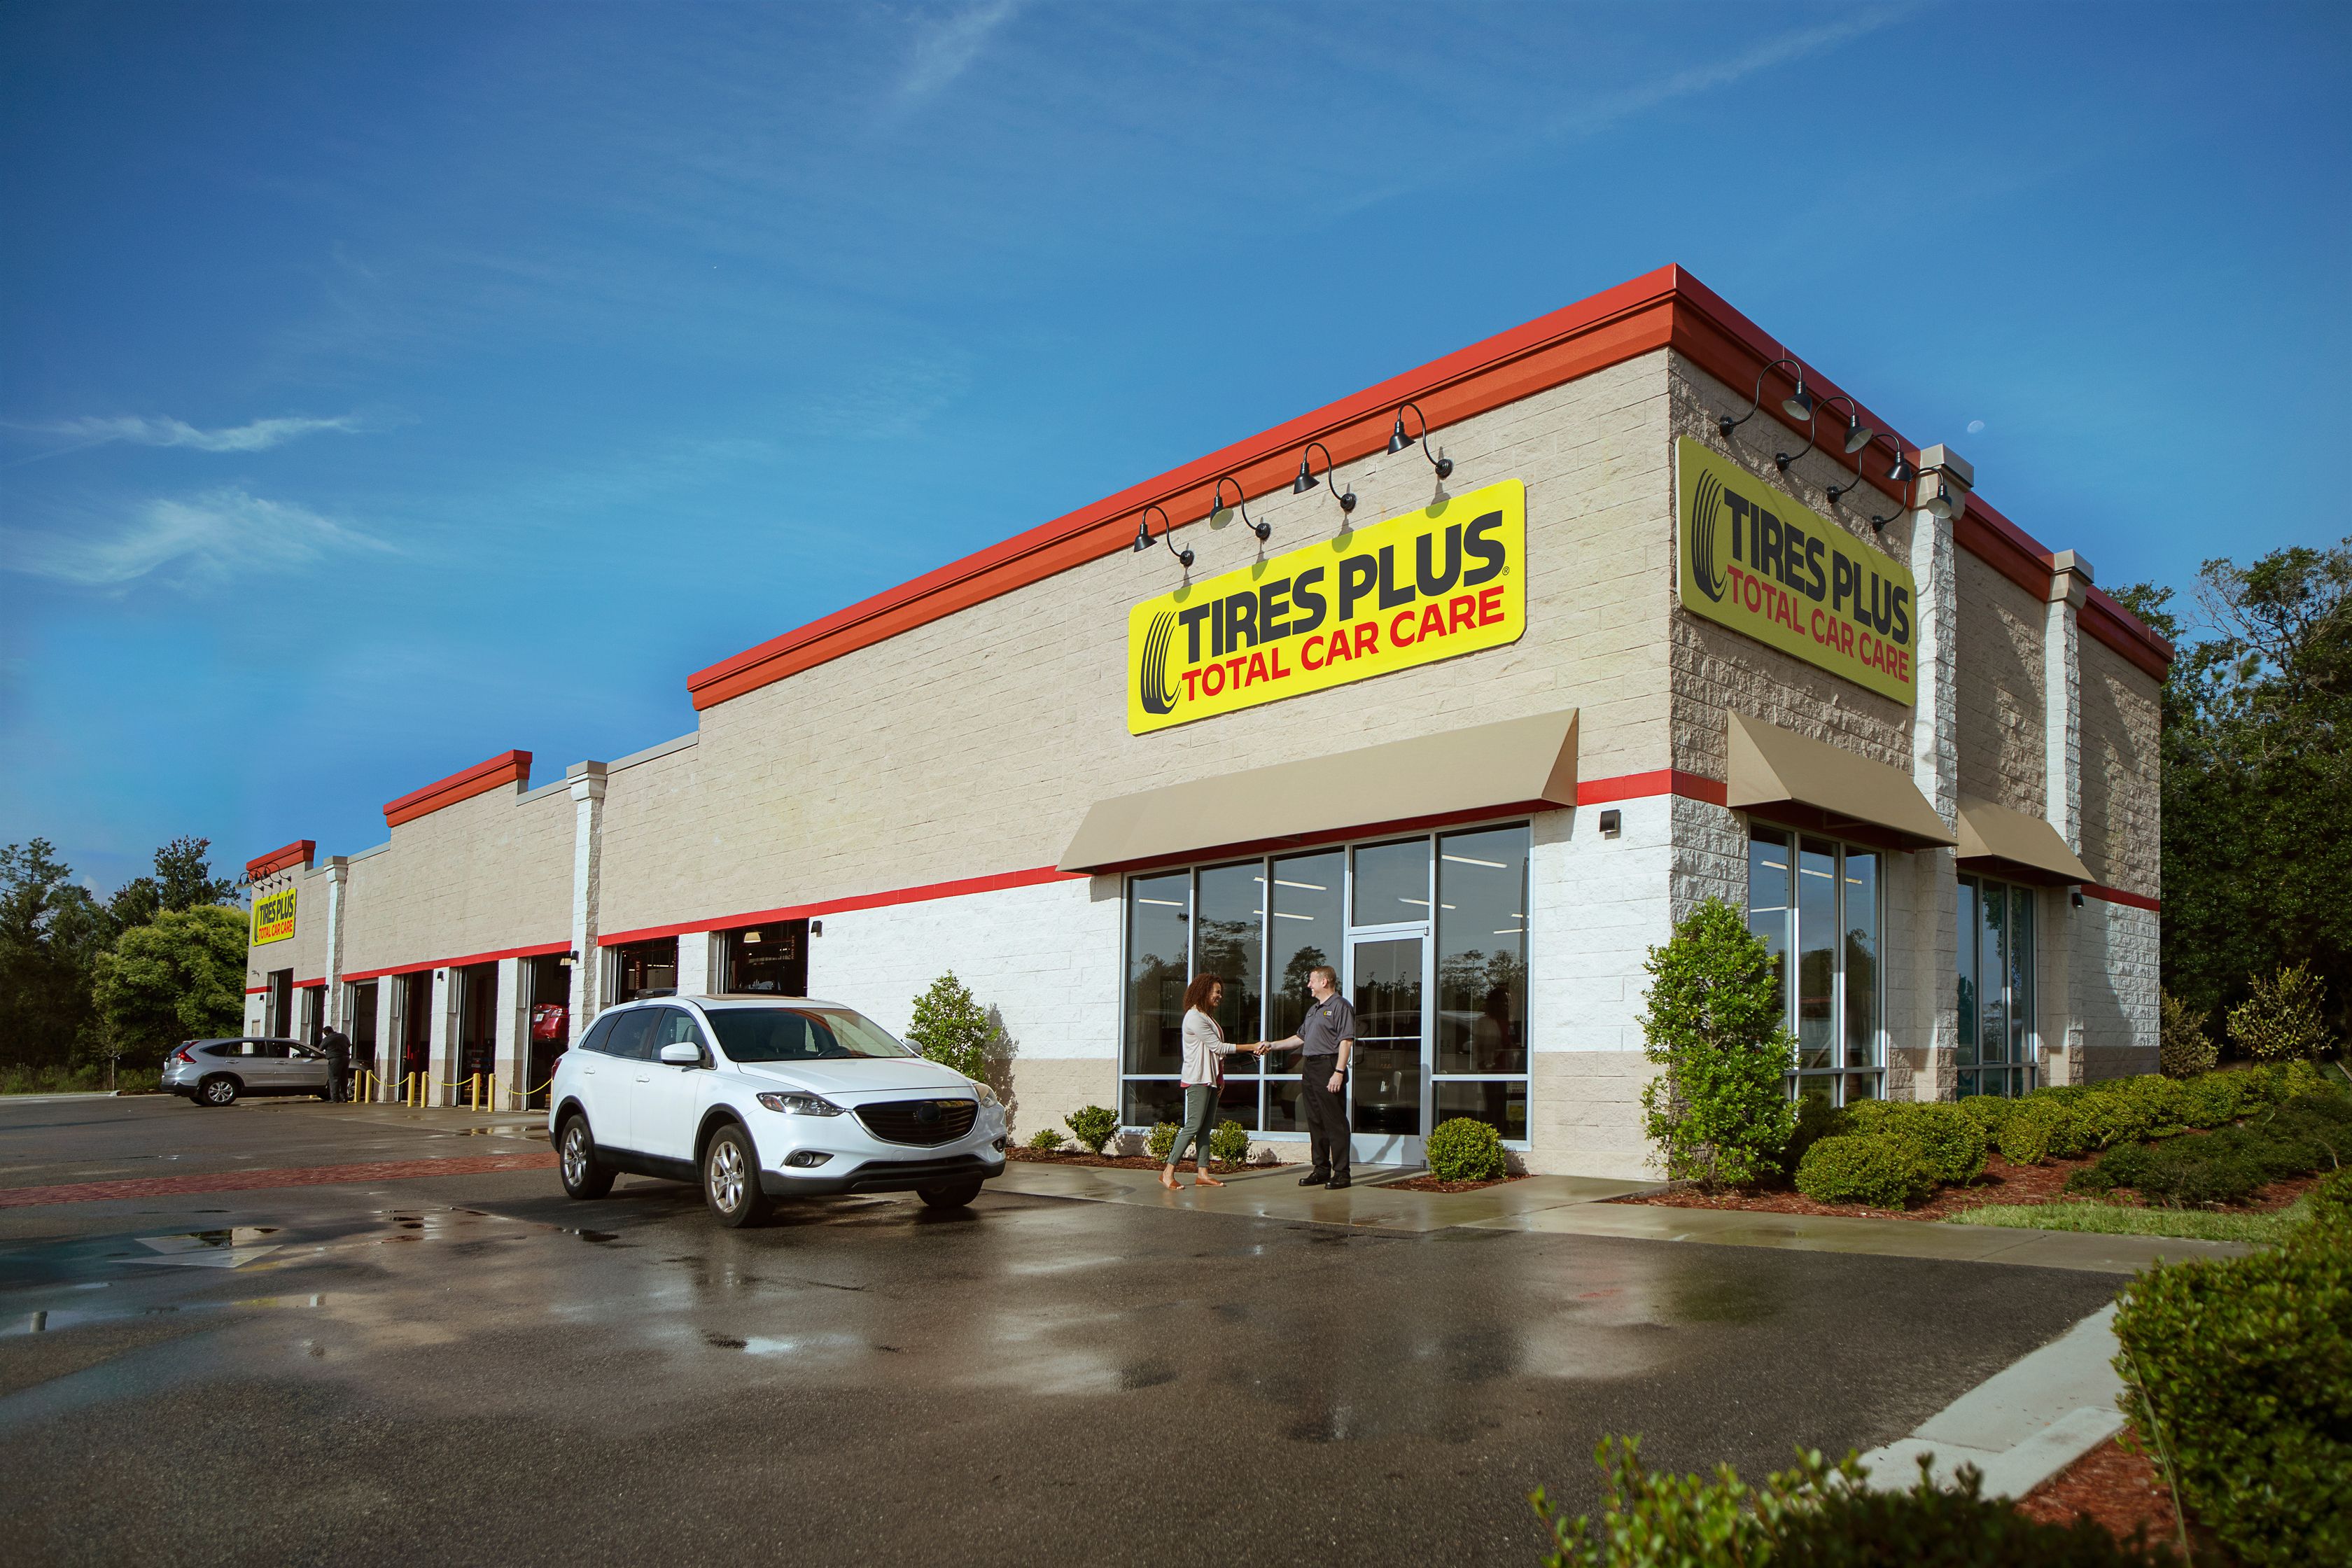 A Tires Plus advisor and customer shaking hands outside of a Tires Plus Total Car Care storefront. 